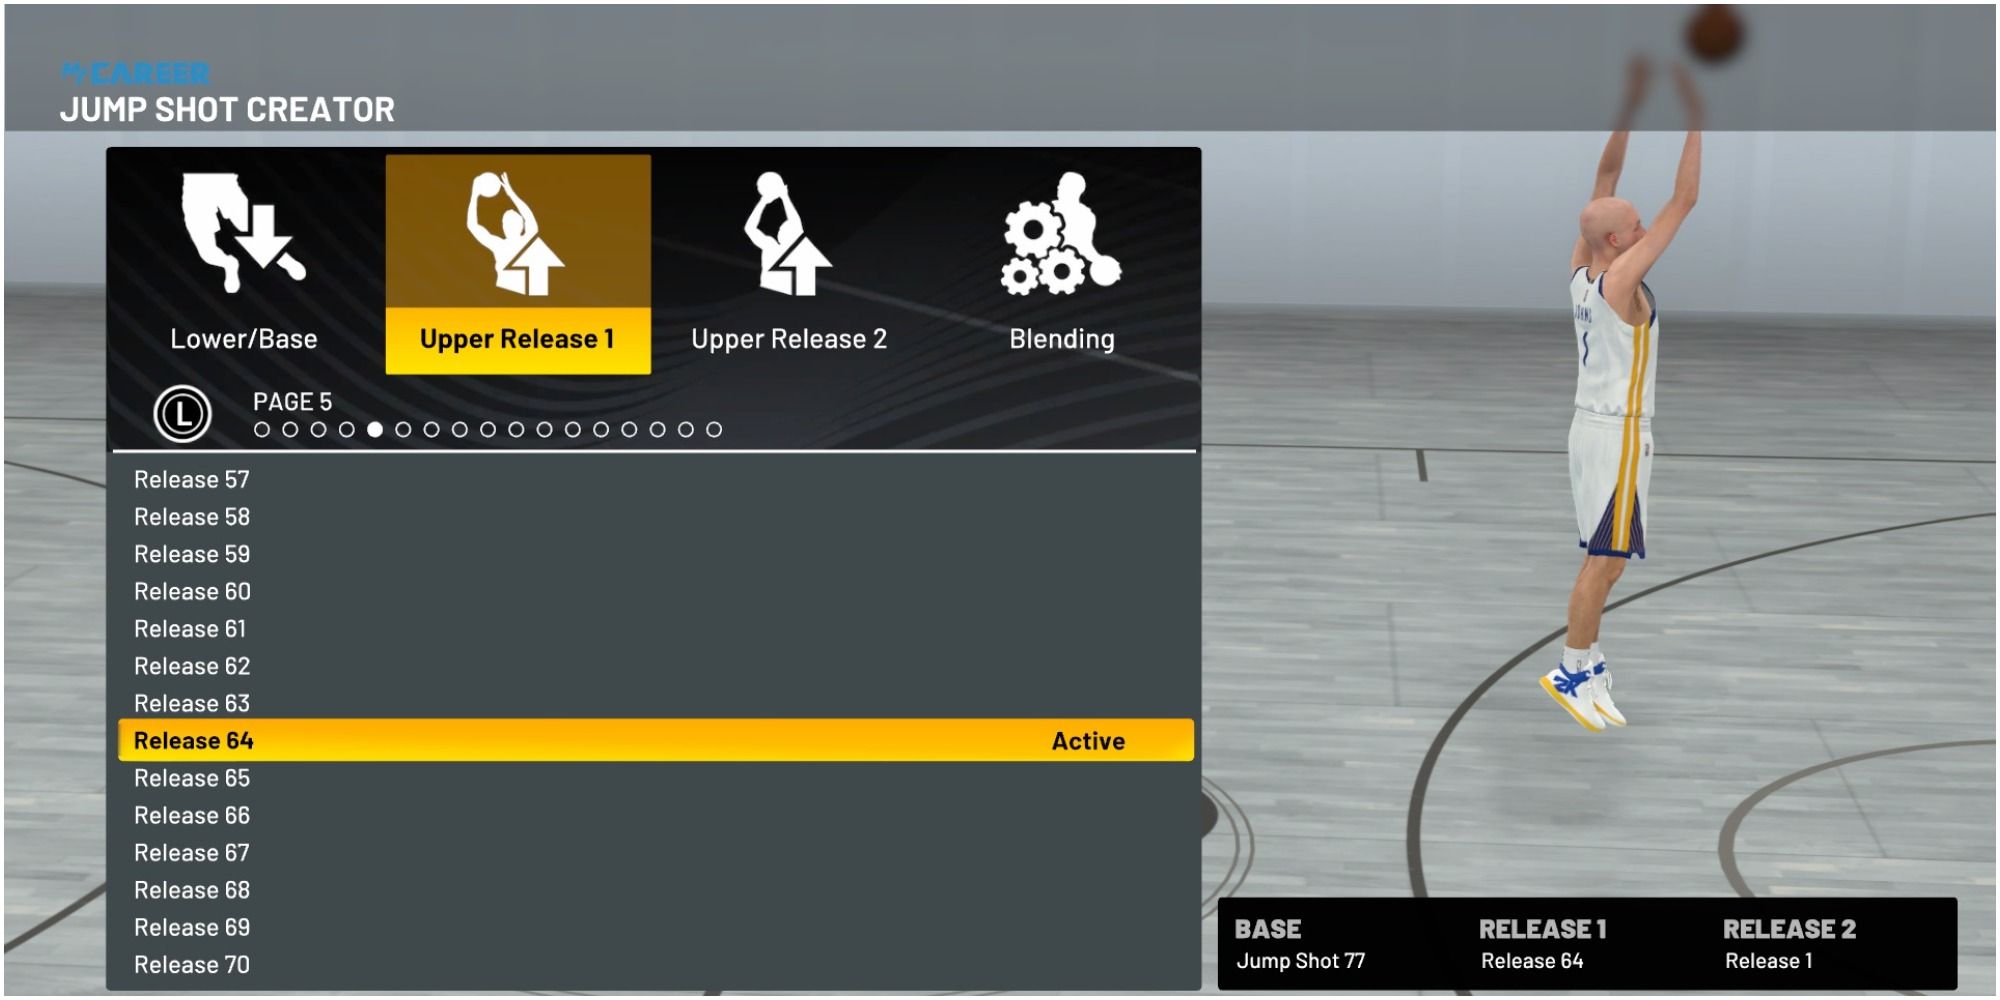 NBA 2K22 Using Release 64 For The Upper Release One In The Custom Jumpshot Creator